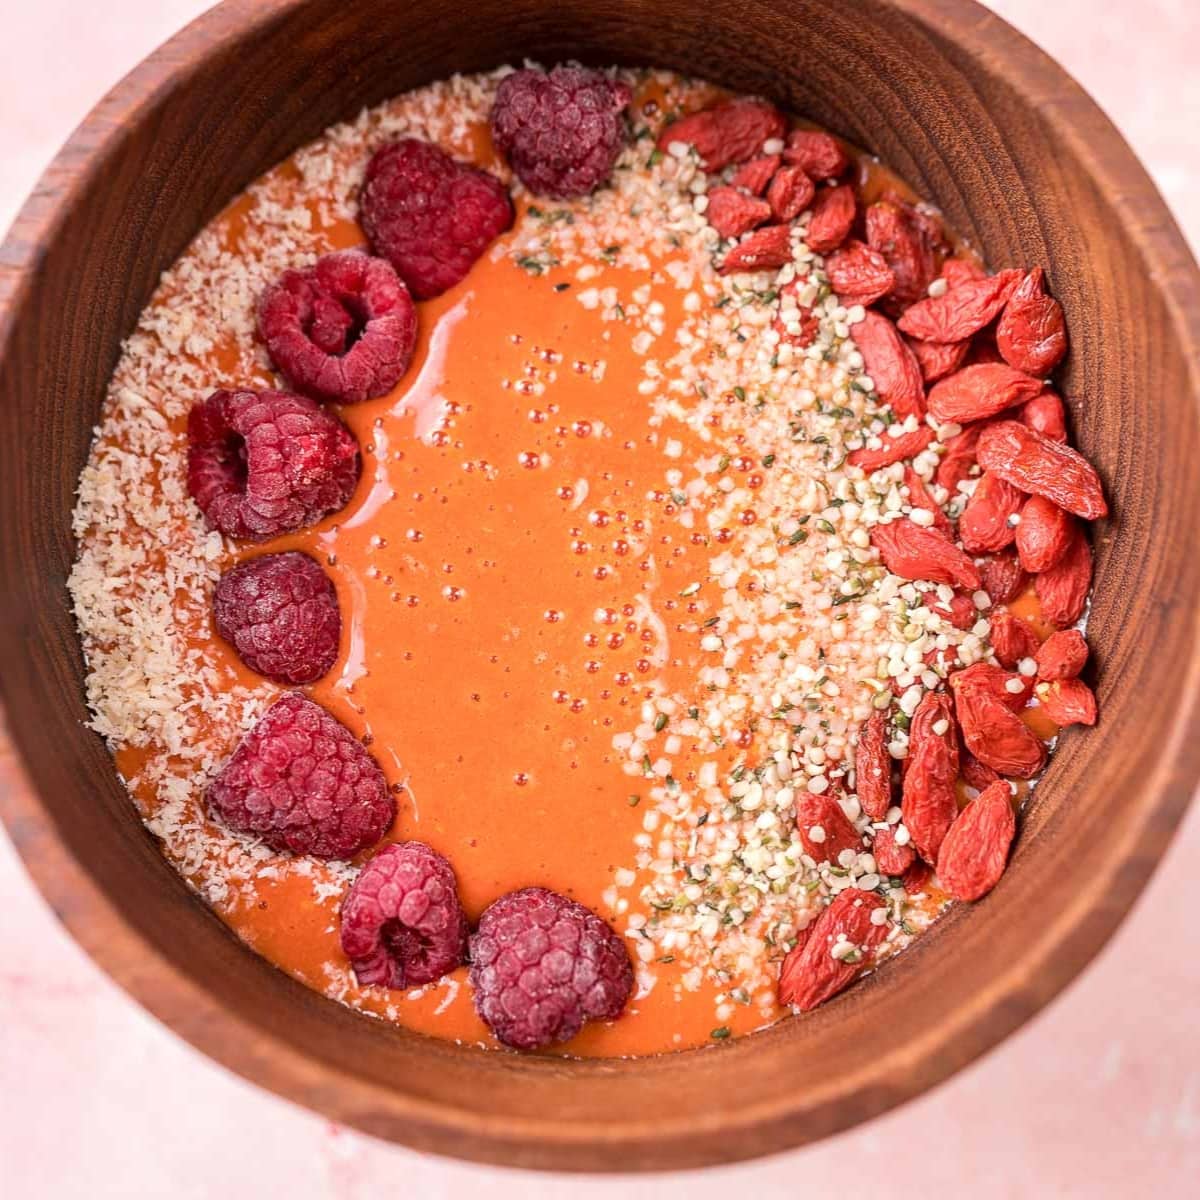 A close shot of a wooden bowl filled with a light red smoothie.